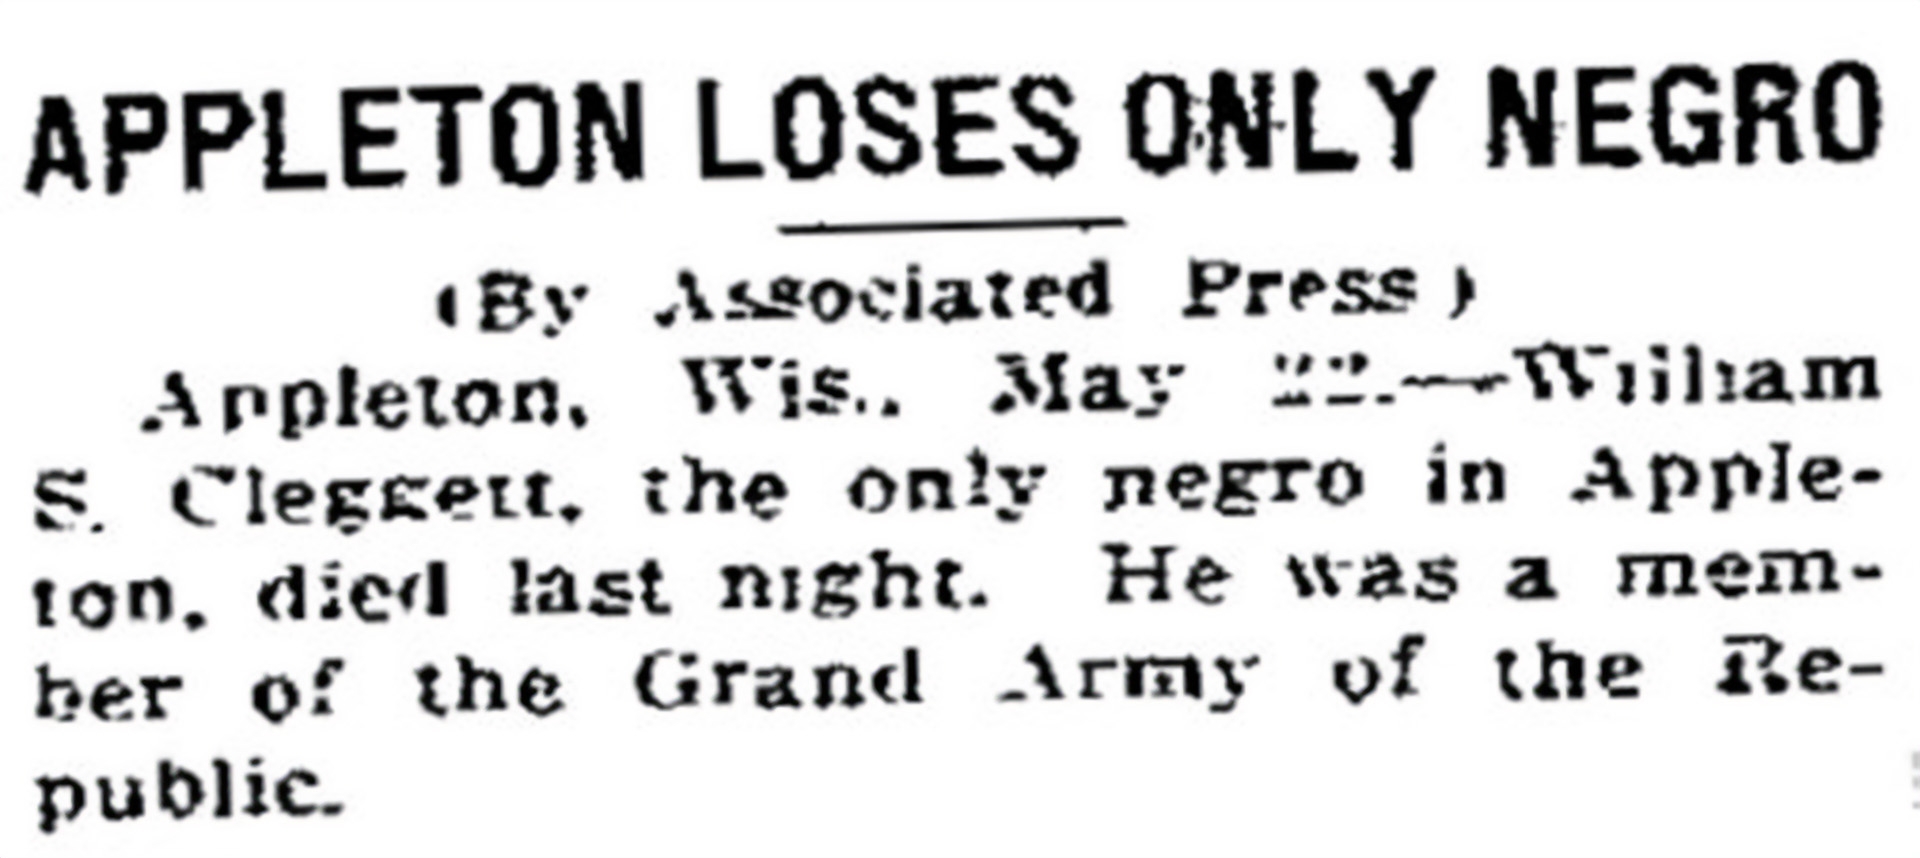 In 1916, Oshkosh Daily Northwestern reported that after the death of resident William Cleggett, there were no longer any Black people in Appleton.